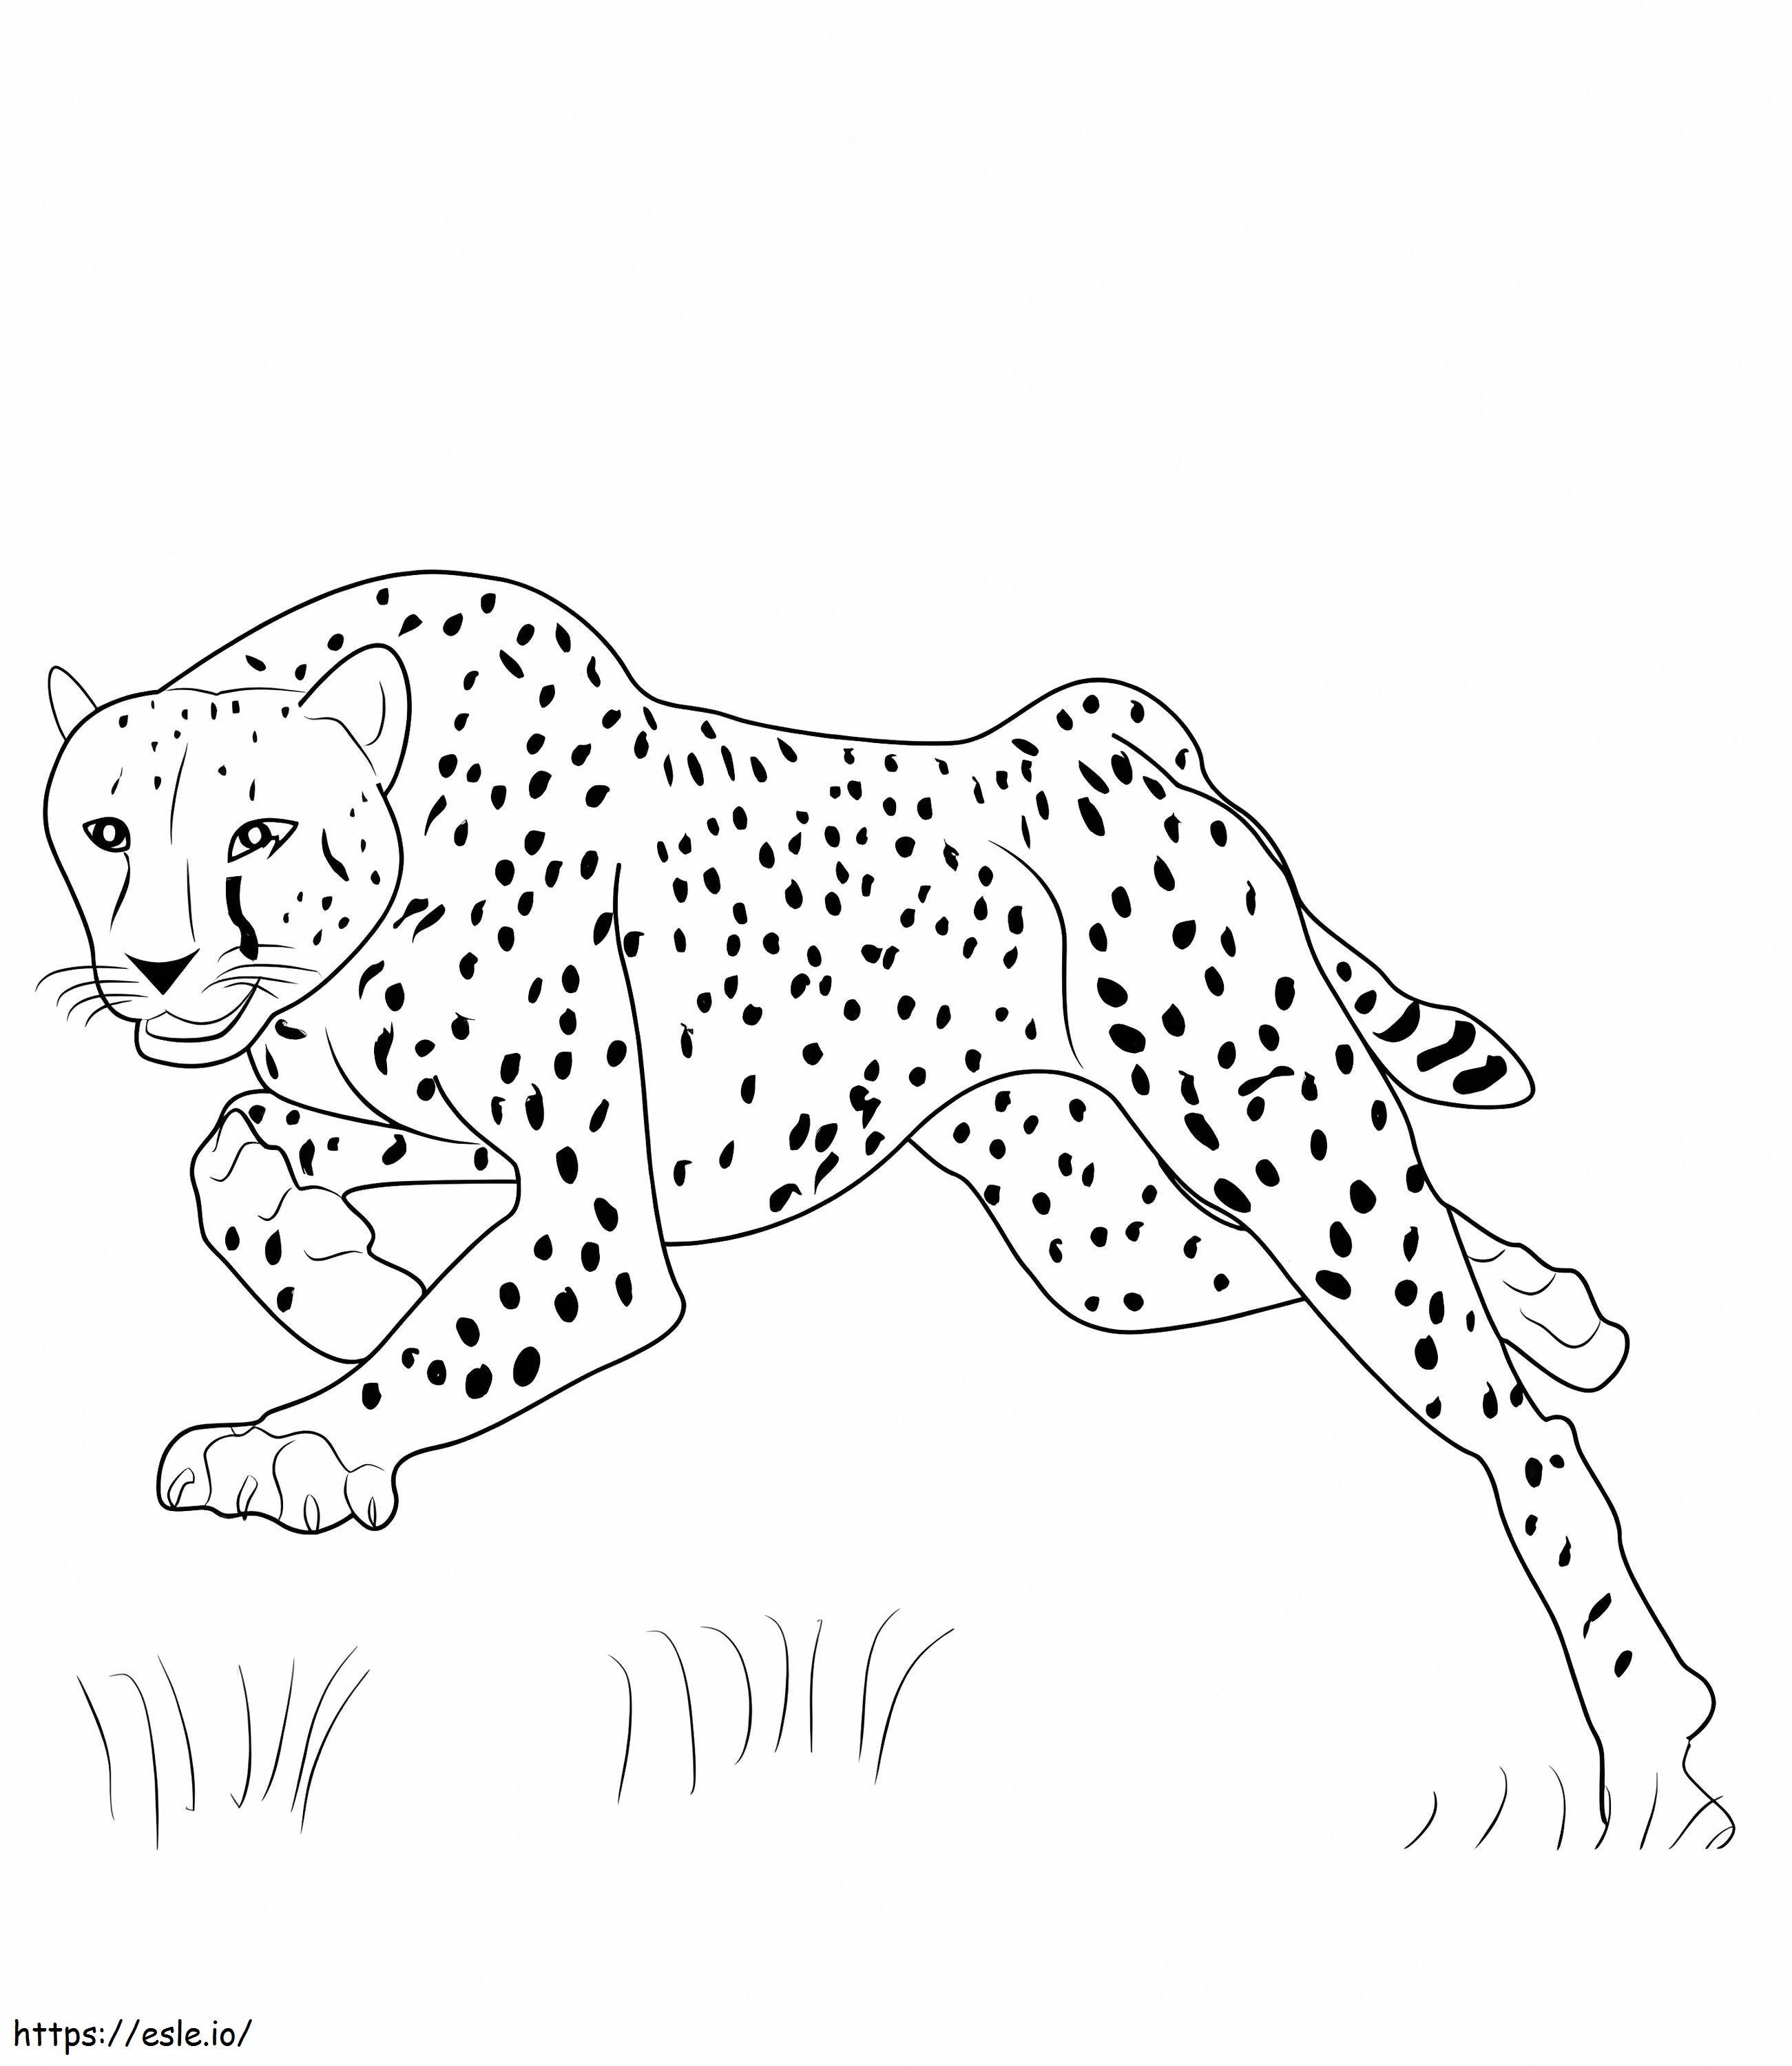 Leaping Cheetah coloring page